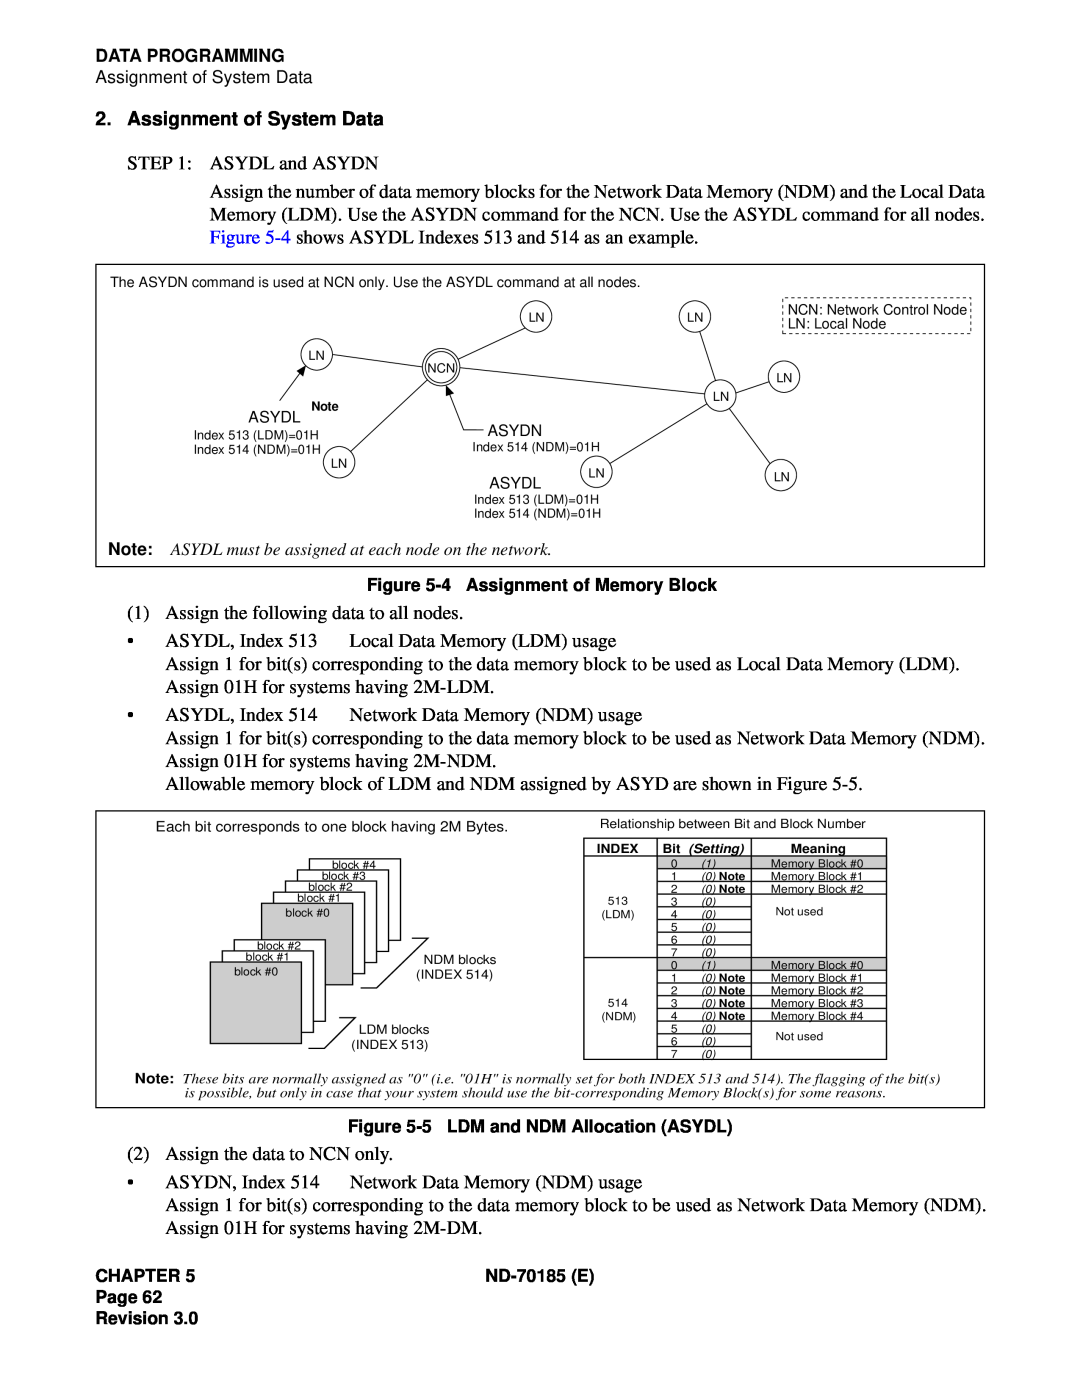 NEC NEAX2400 system manual Assignment of System Data 